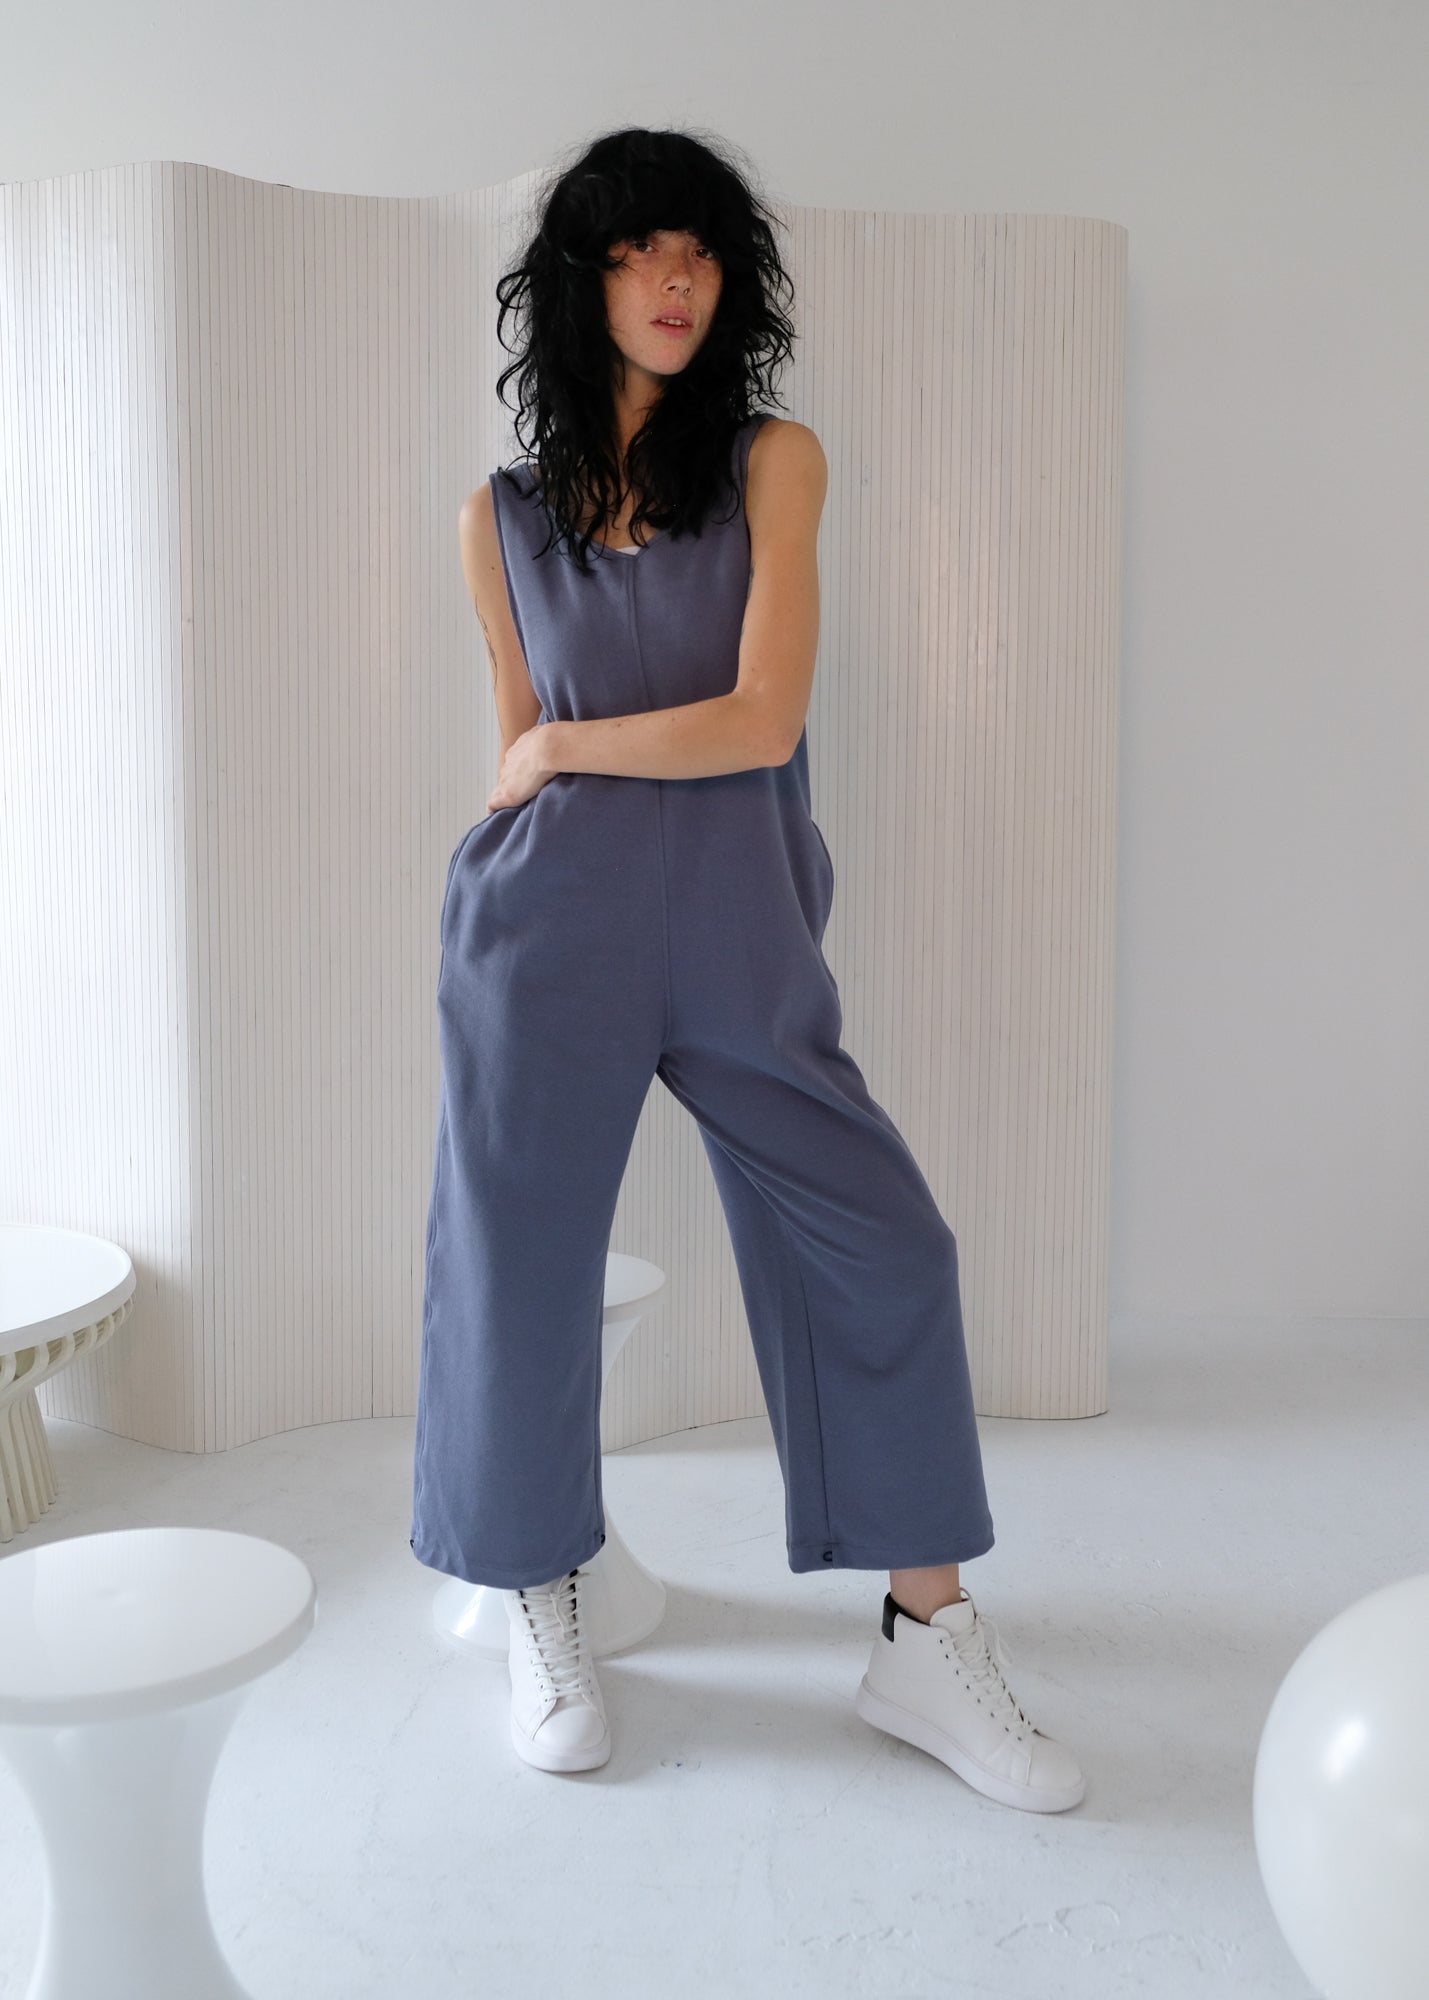 13 GRETEL OVERALLS / STRETCH DOUBLE JERSEY - C10